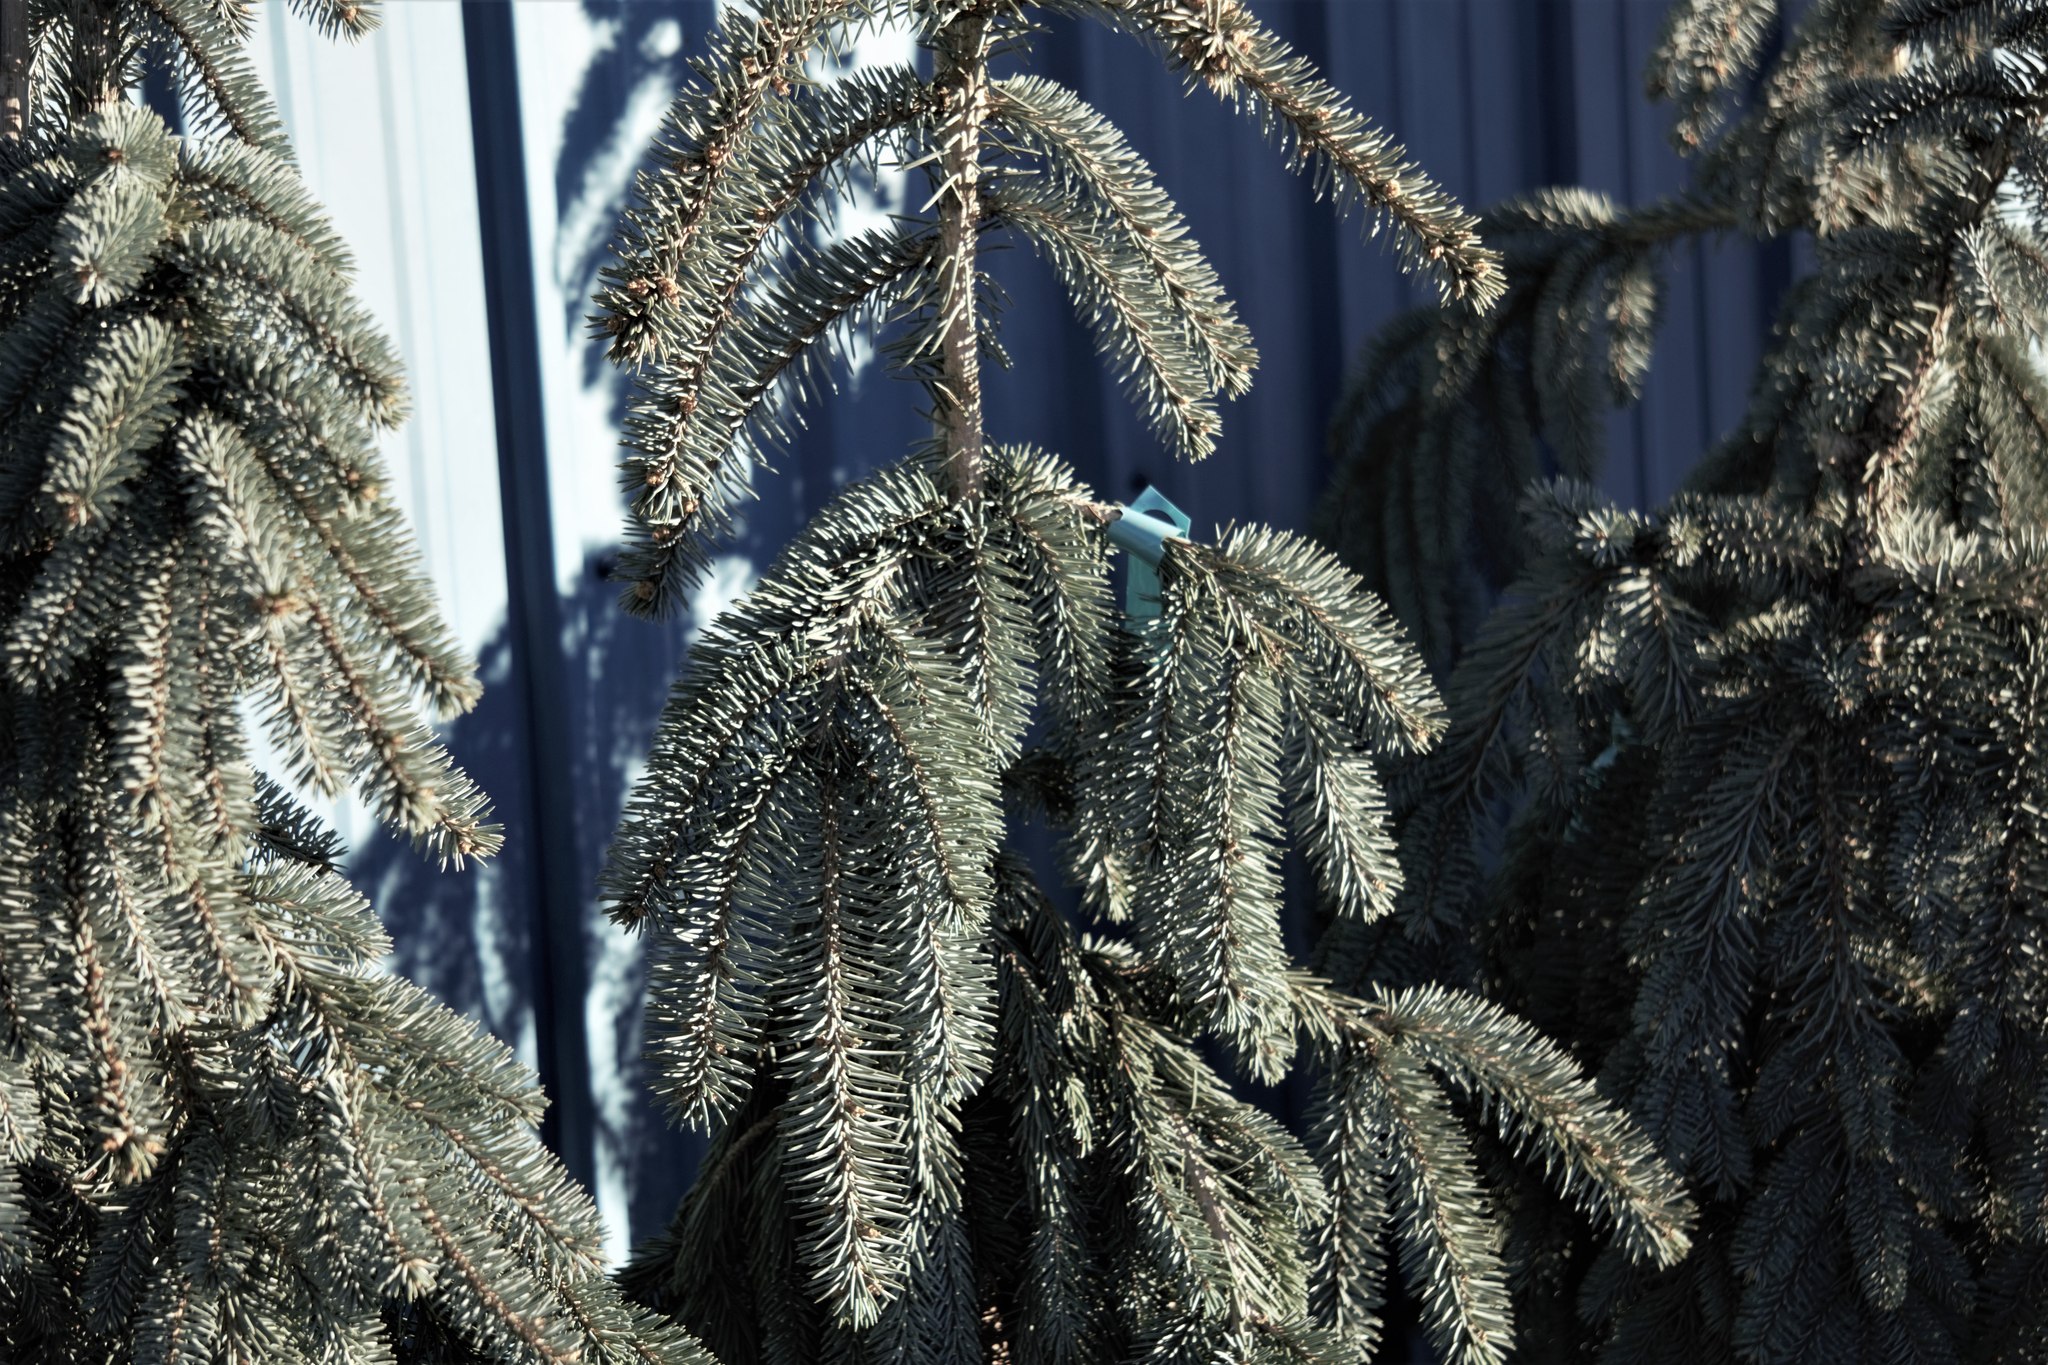 The Blues Weeping Spruce